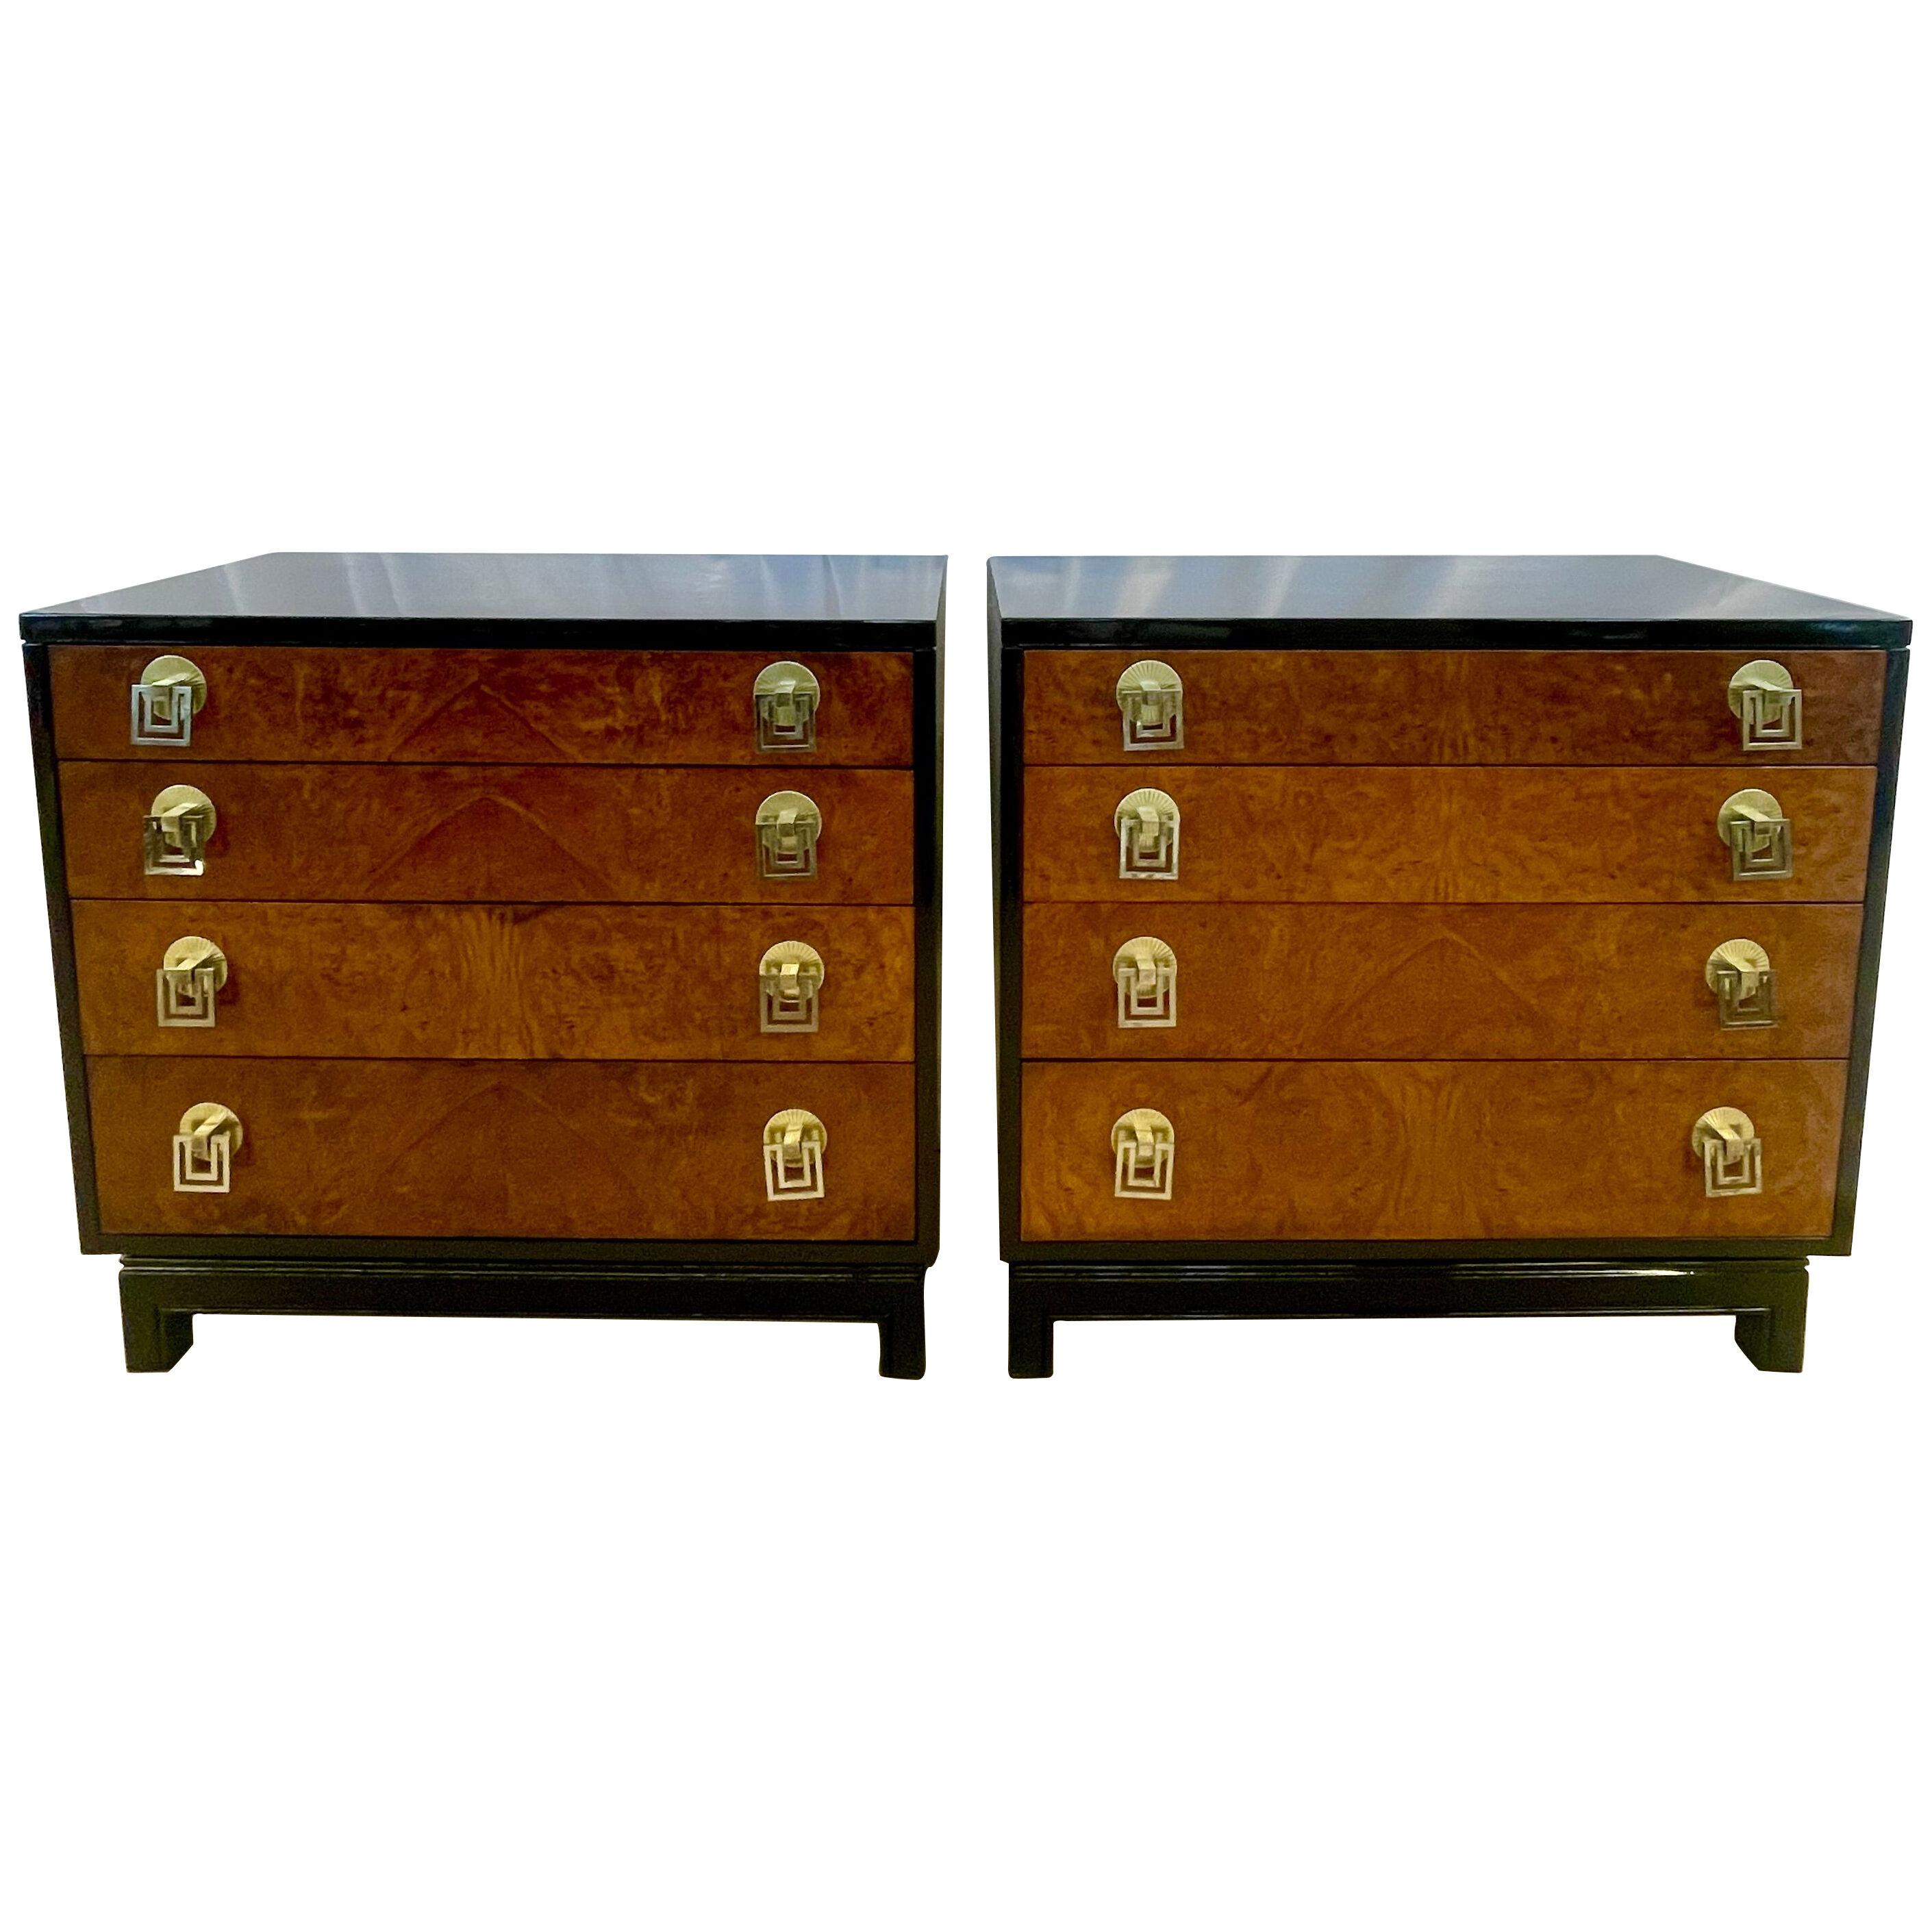 Pair of Mid-Century Modern Commodes, Chests by Renzo Rutili for John Stuart